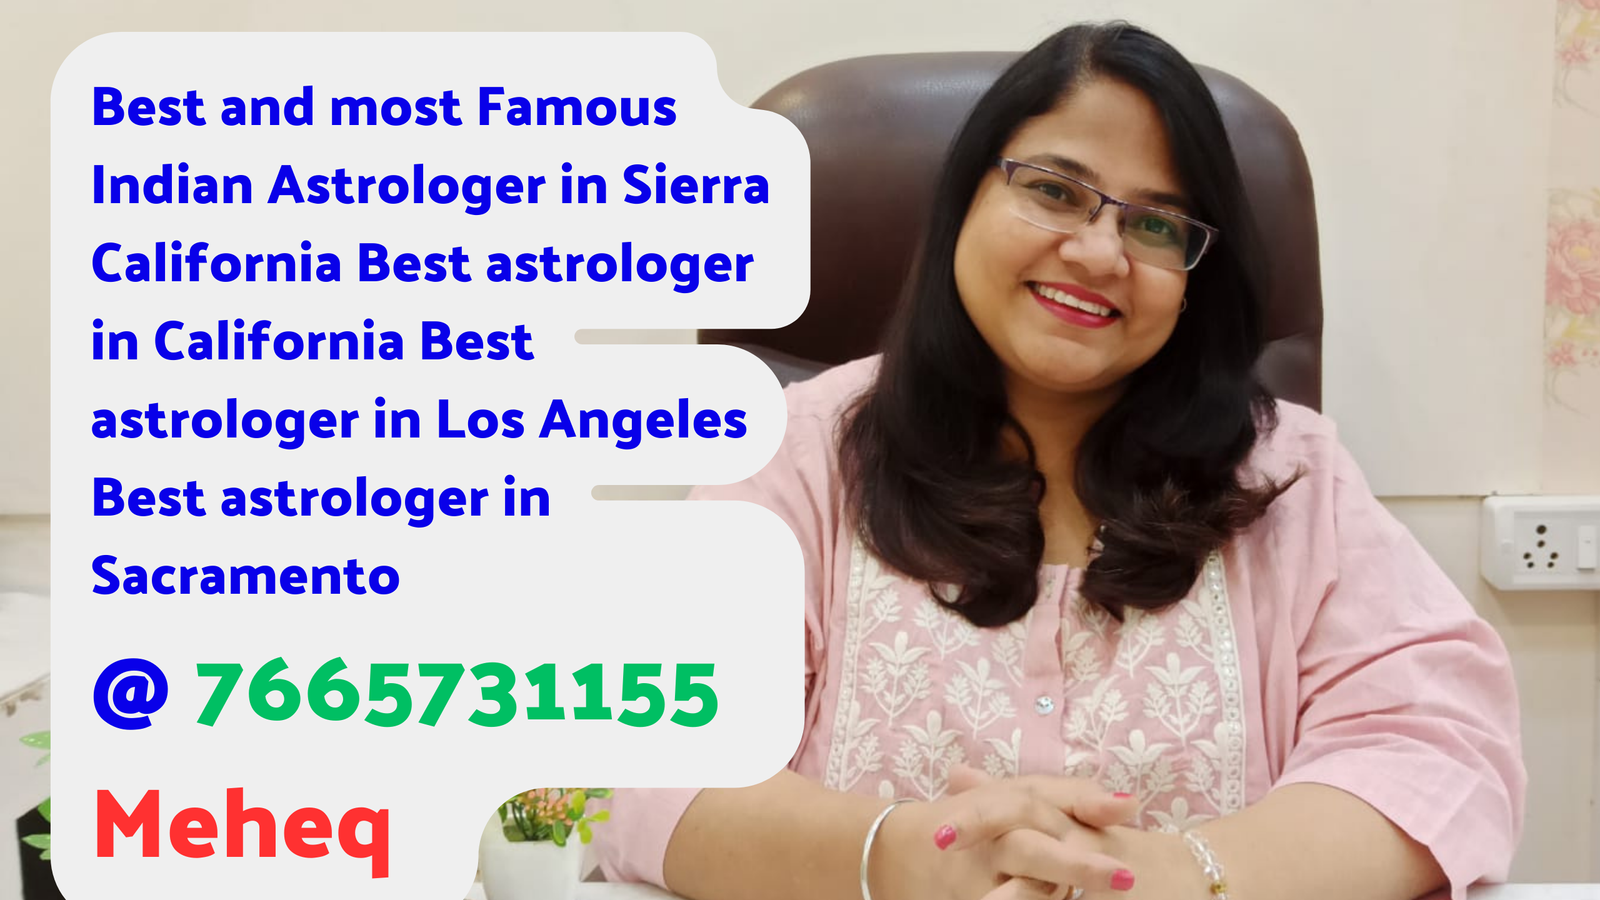 Best and most Famous Indian Astrologer in Sierra California Best astrologer in California Best astrologer in Los Angeles Best astrologer in Sacramento